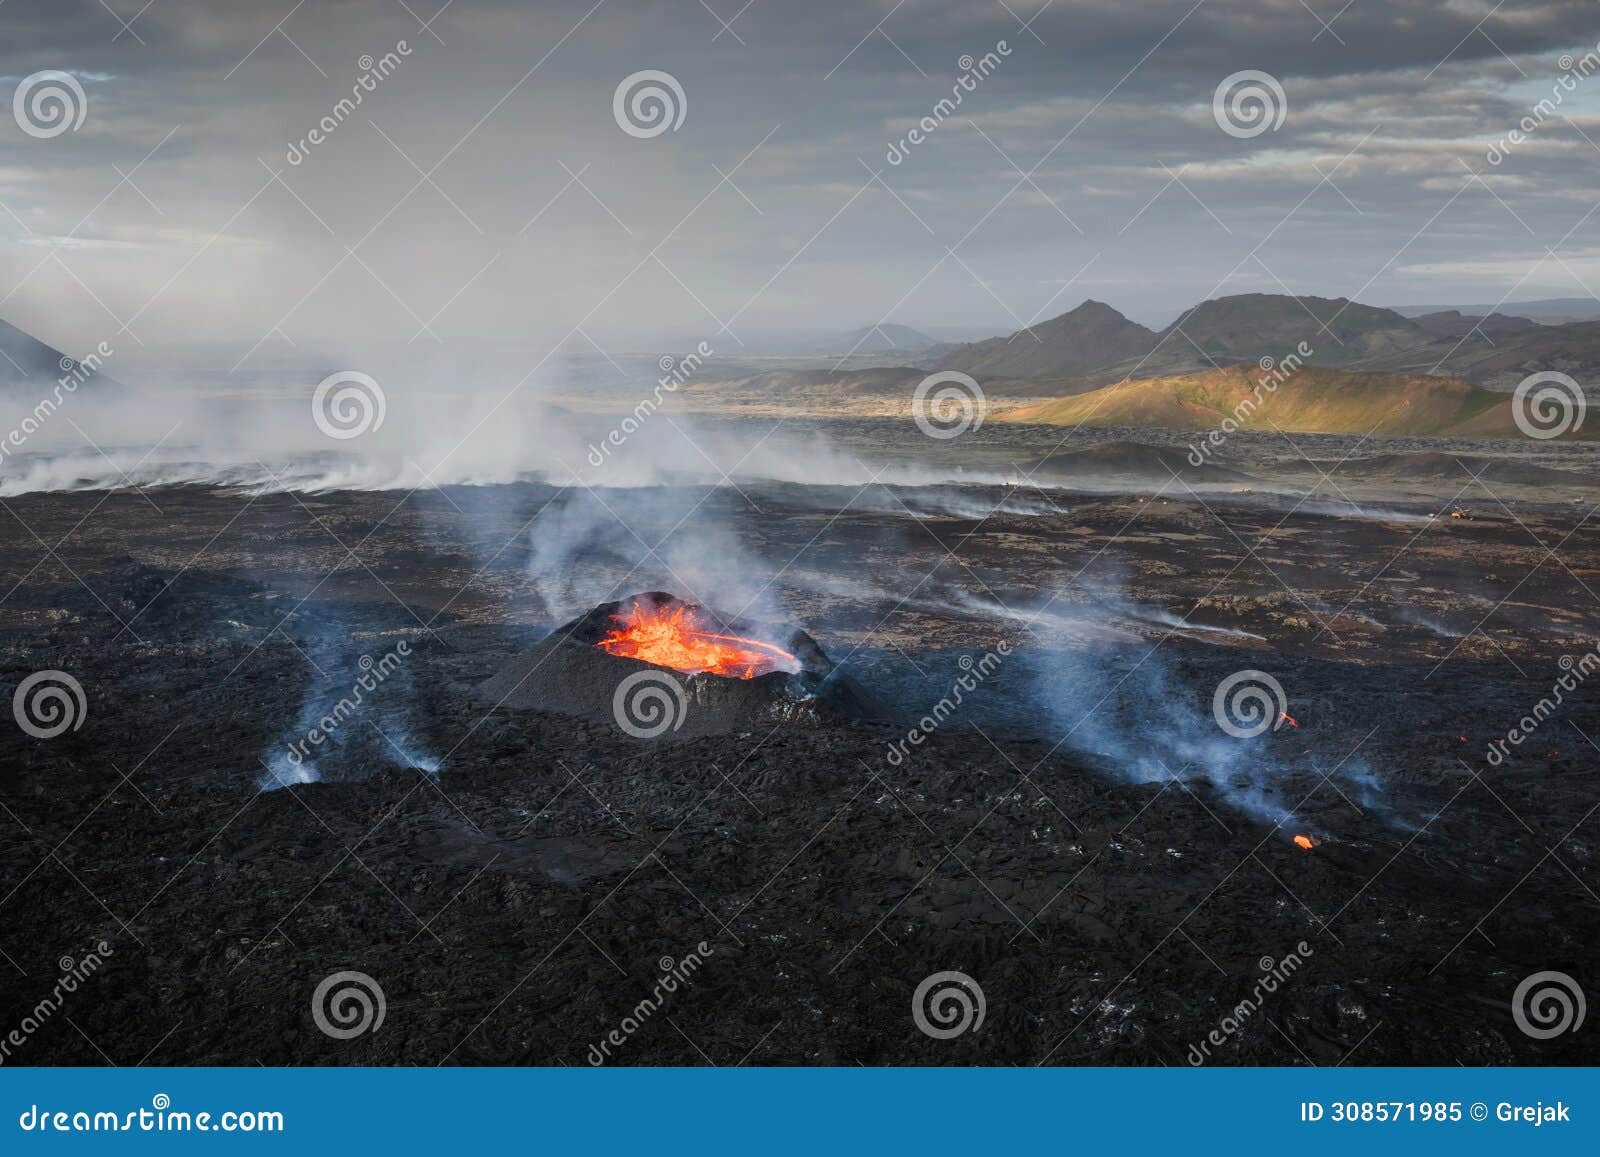 apocalyptic surroundings of an erupted volcano, lava and smoke spreading, aerial